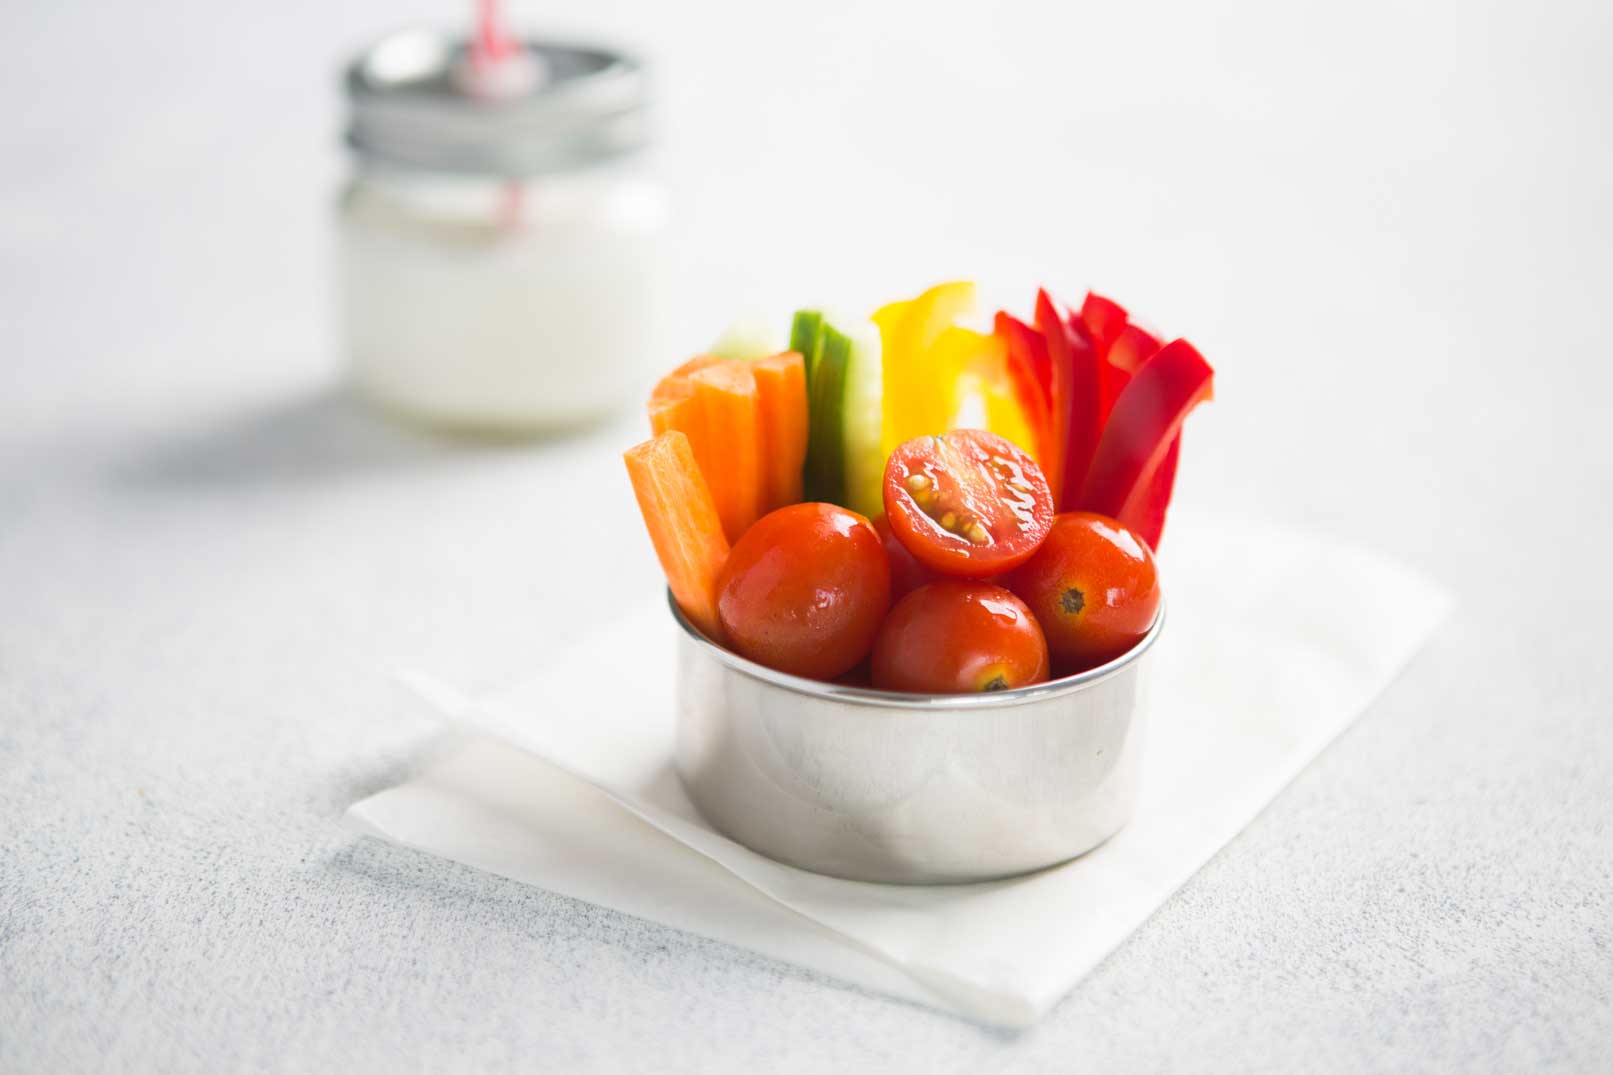 Sliced carrot, cucumber, red capsicum with cherry tomatoes in a silver bowl on a napkin and a container of milk.